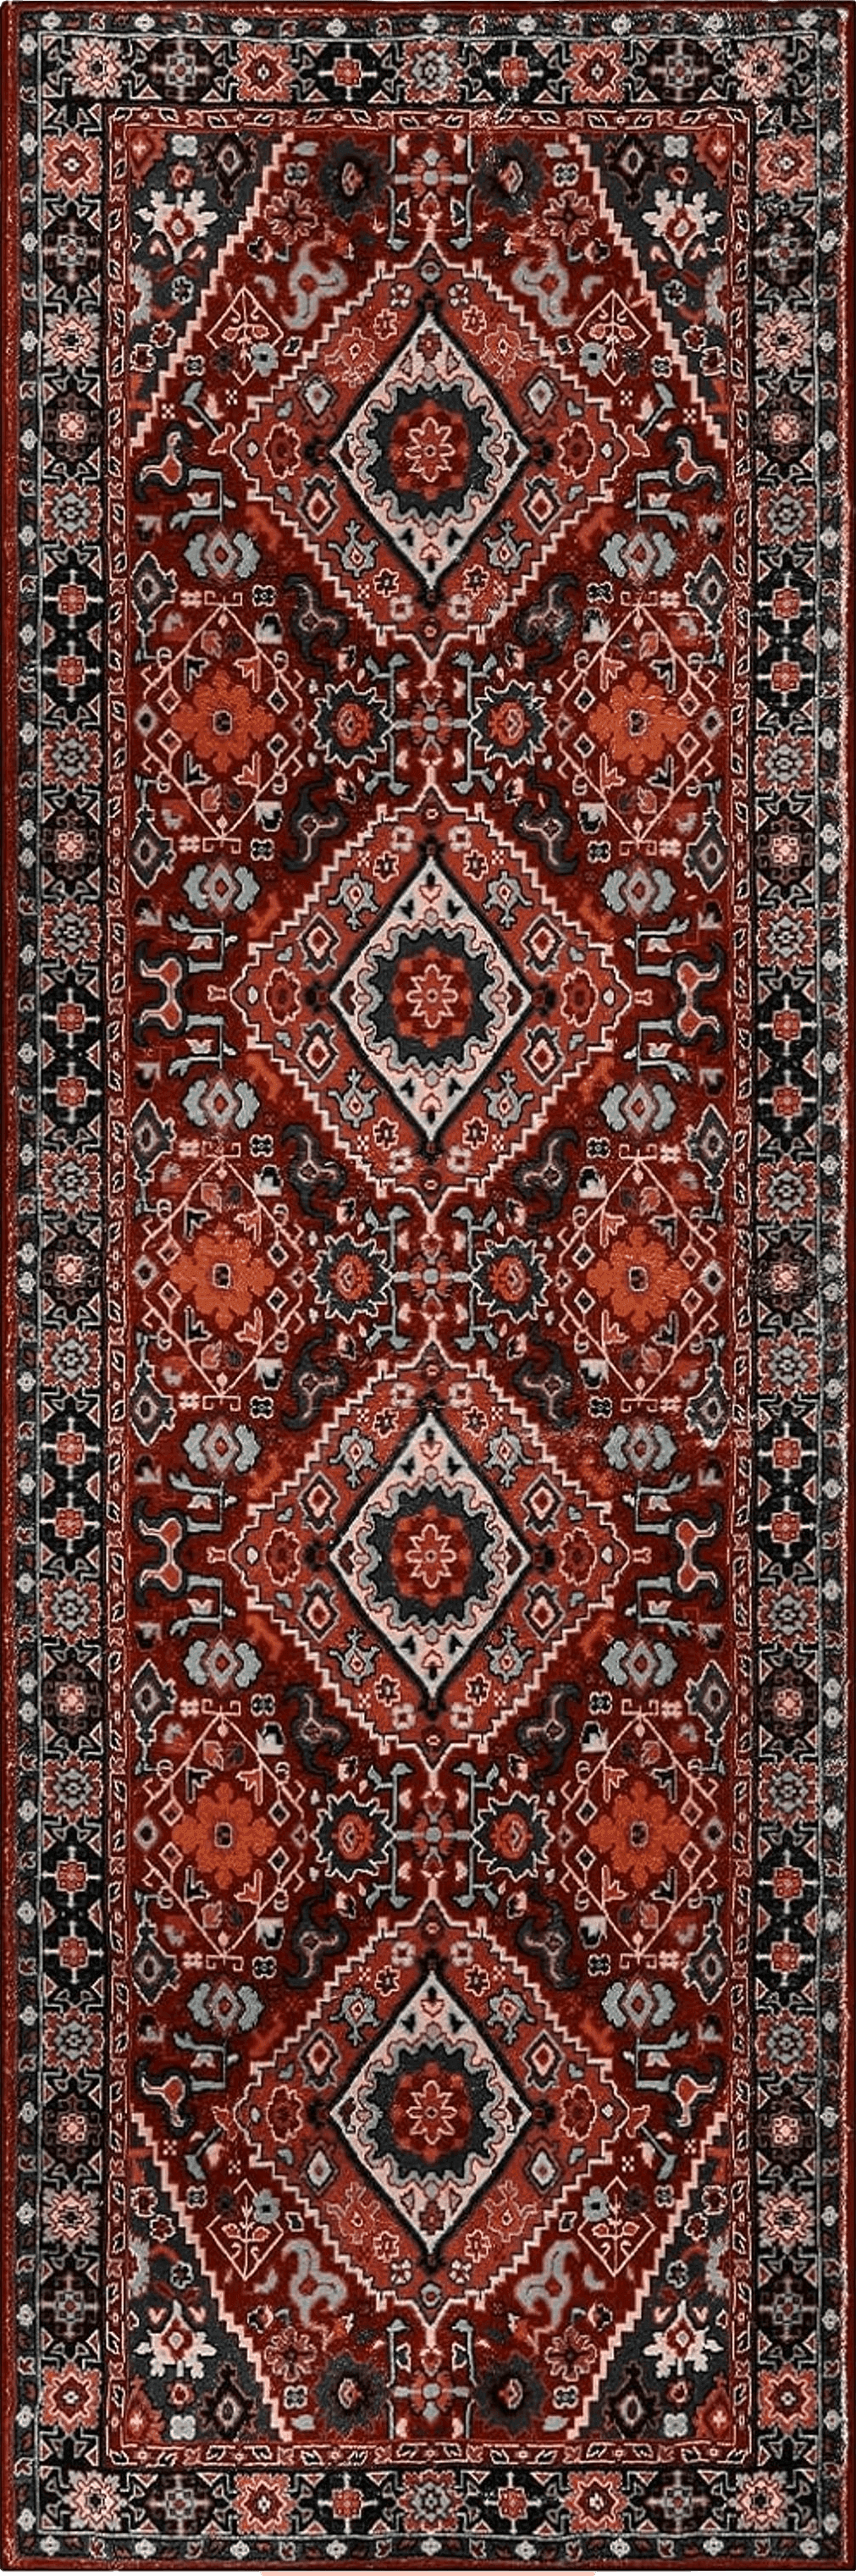 Beeiva Oriental Hallway Runner Rug, 2x6 Red Carpet Runners Rugs for Hallways 2x6 Rug for Bedroom Kitchen Bathroom, Vintage Non Slip Bedside Laundry Room Runner Rugs with Rubber Backing